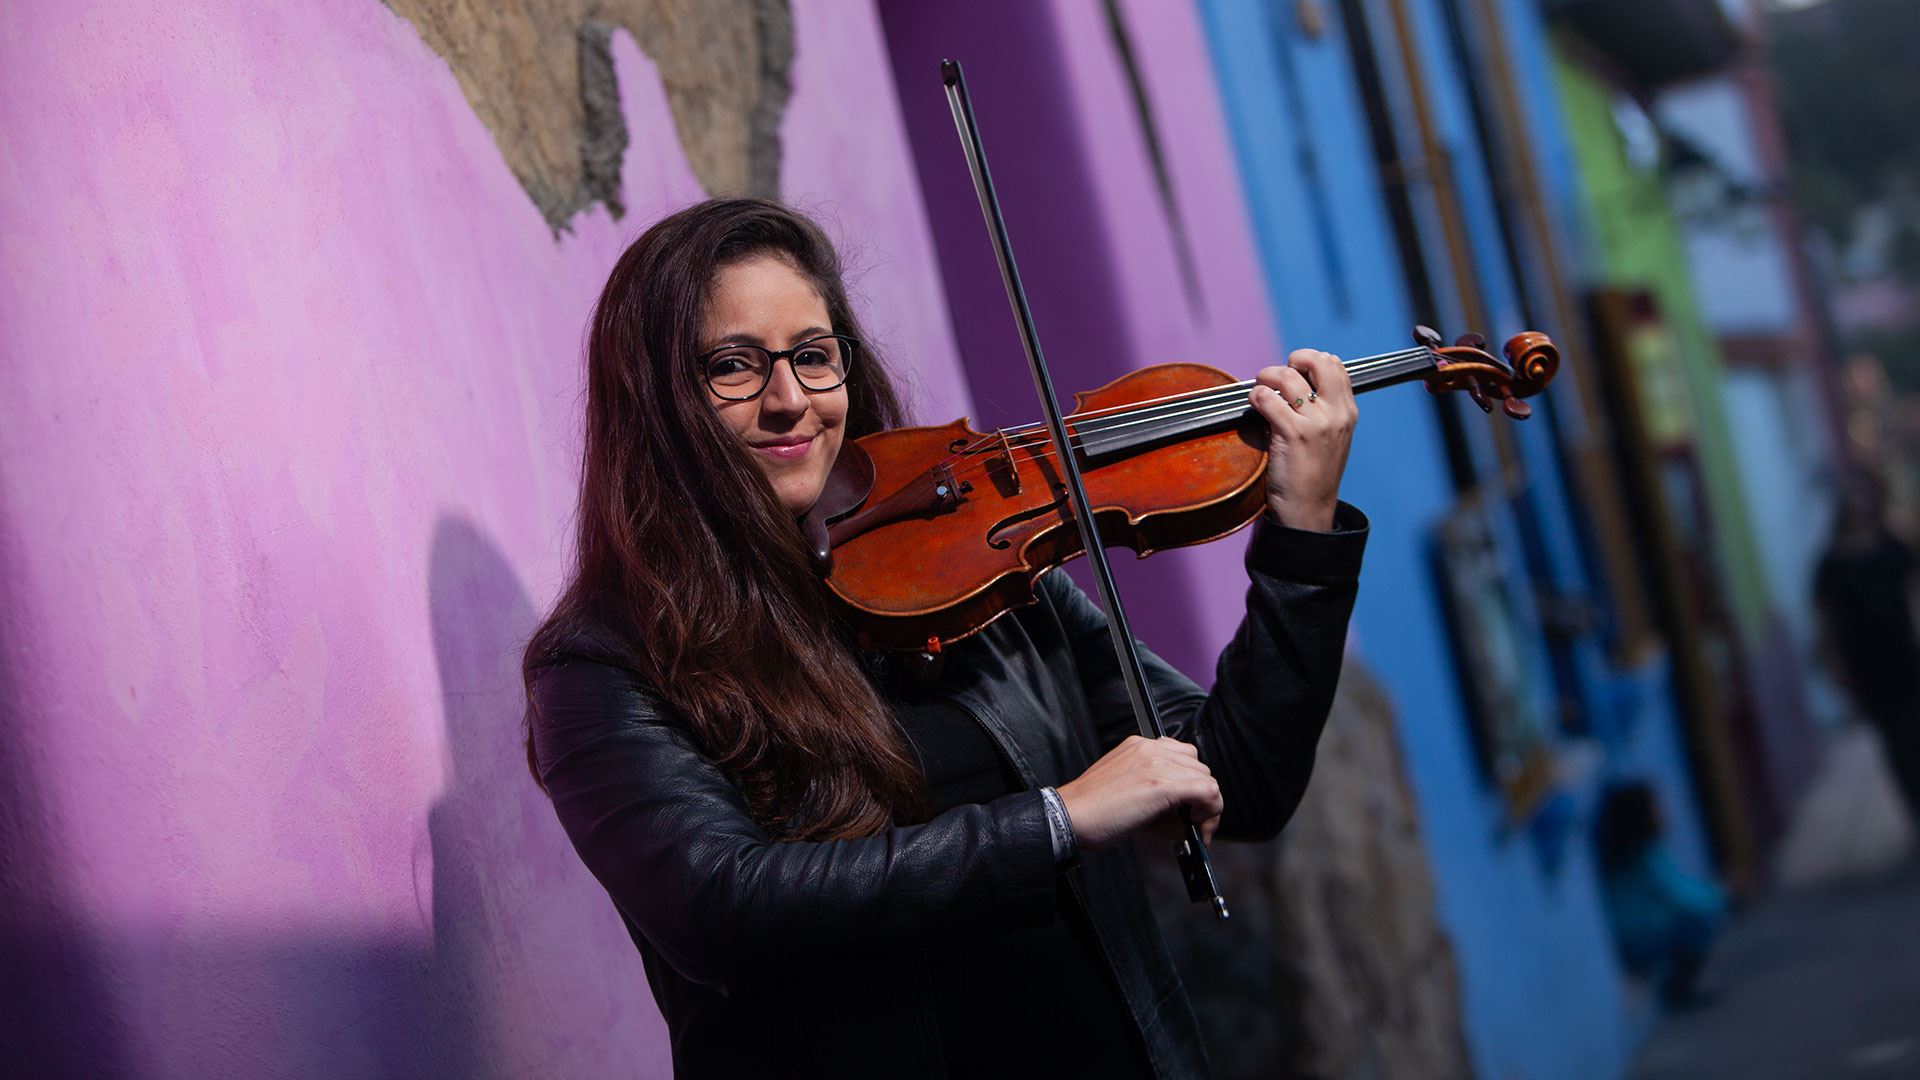 Daniela Padr&#243;n wearing a leather jacket and playing a violin in front of a colorful wall.